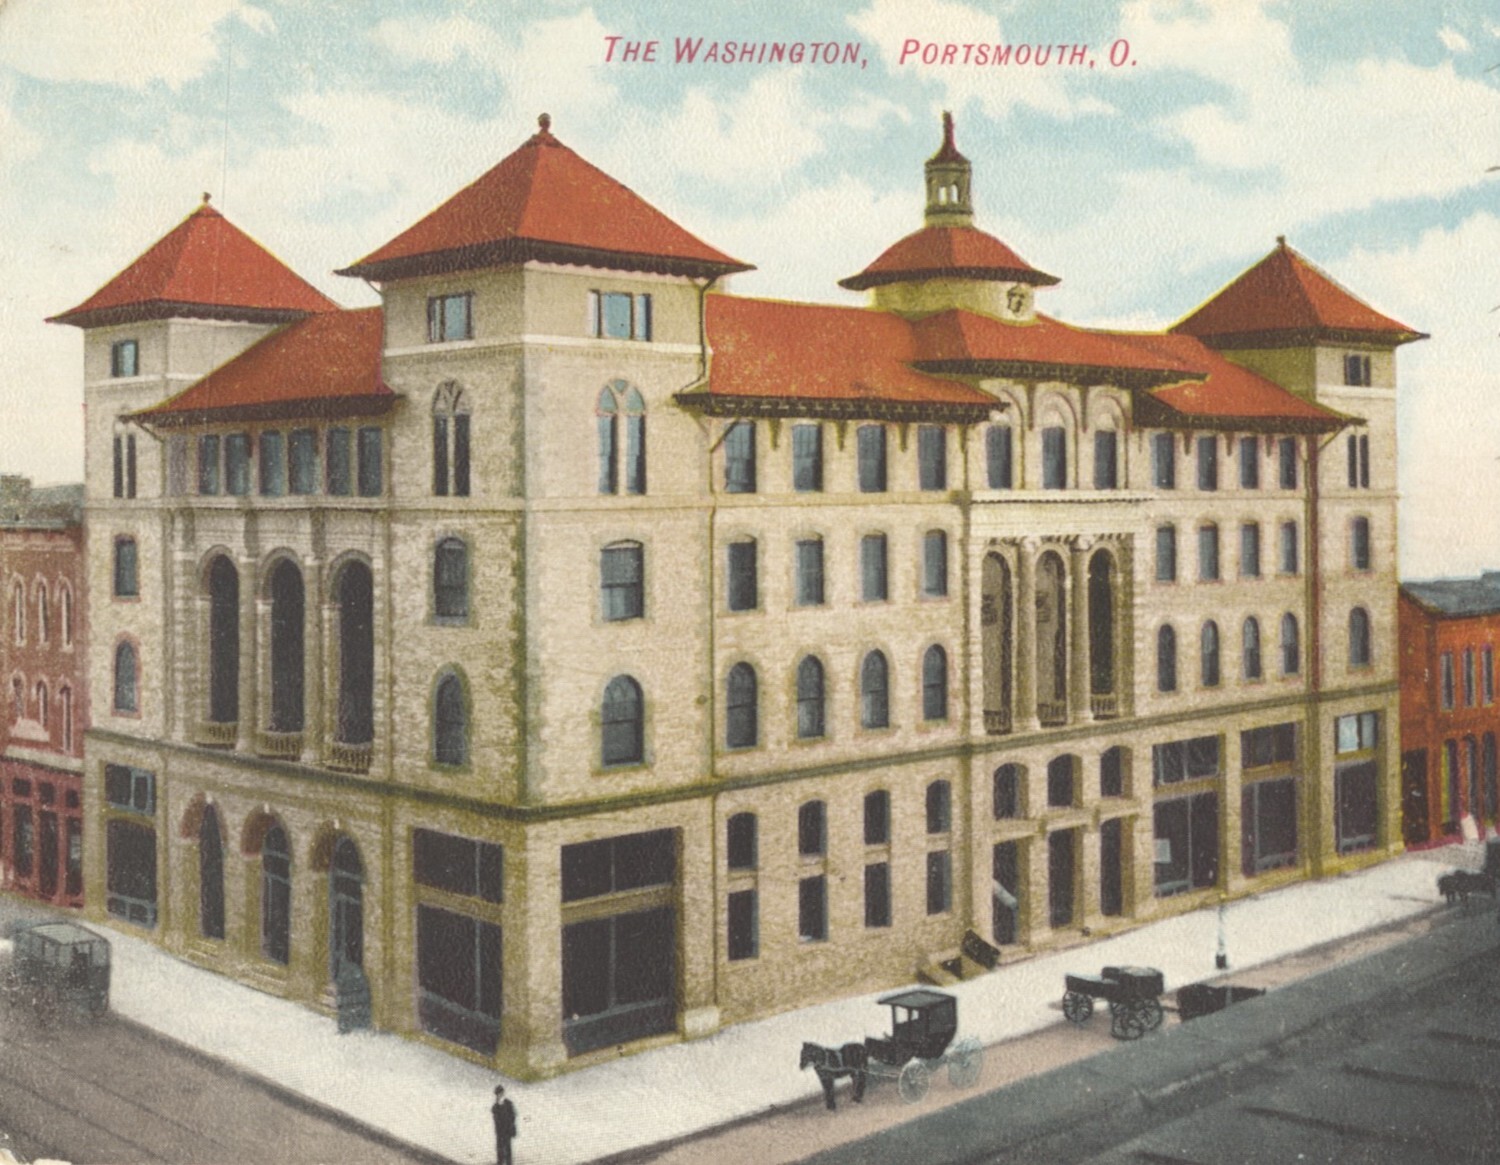 The Washington Hotel at Second and Market Streets